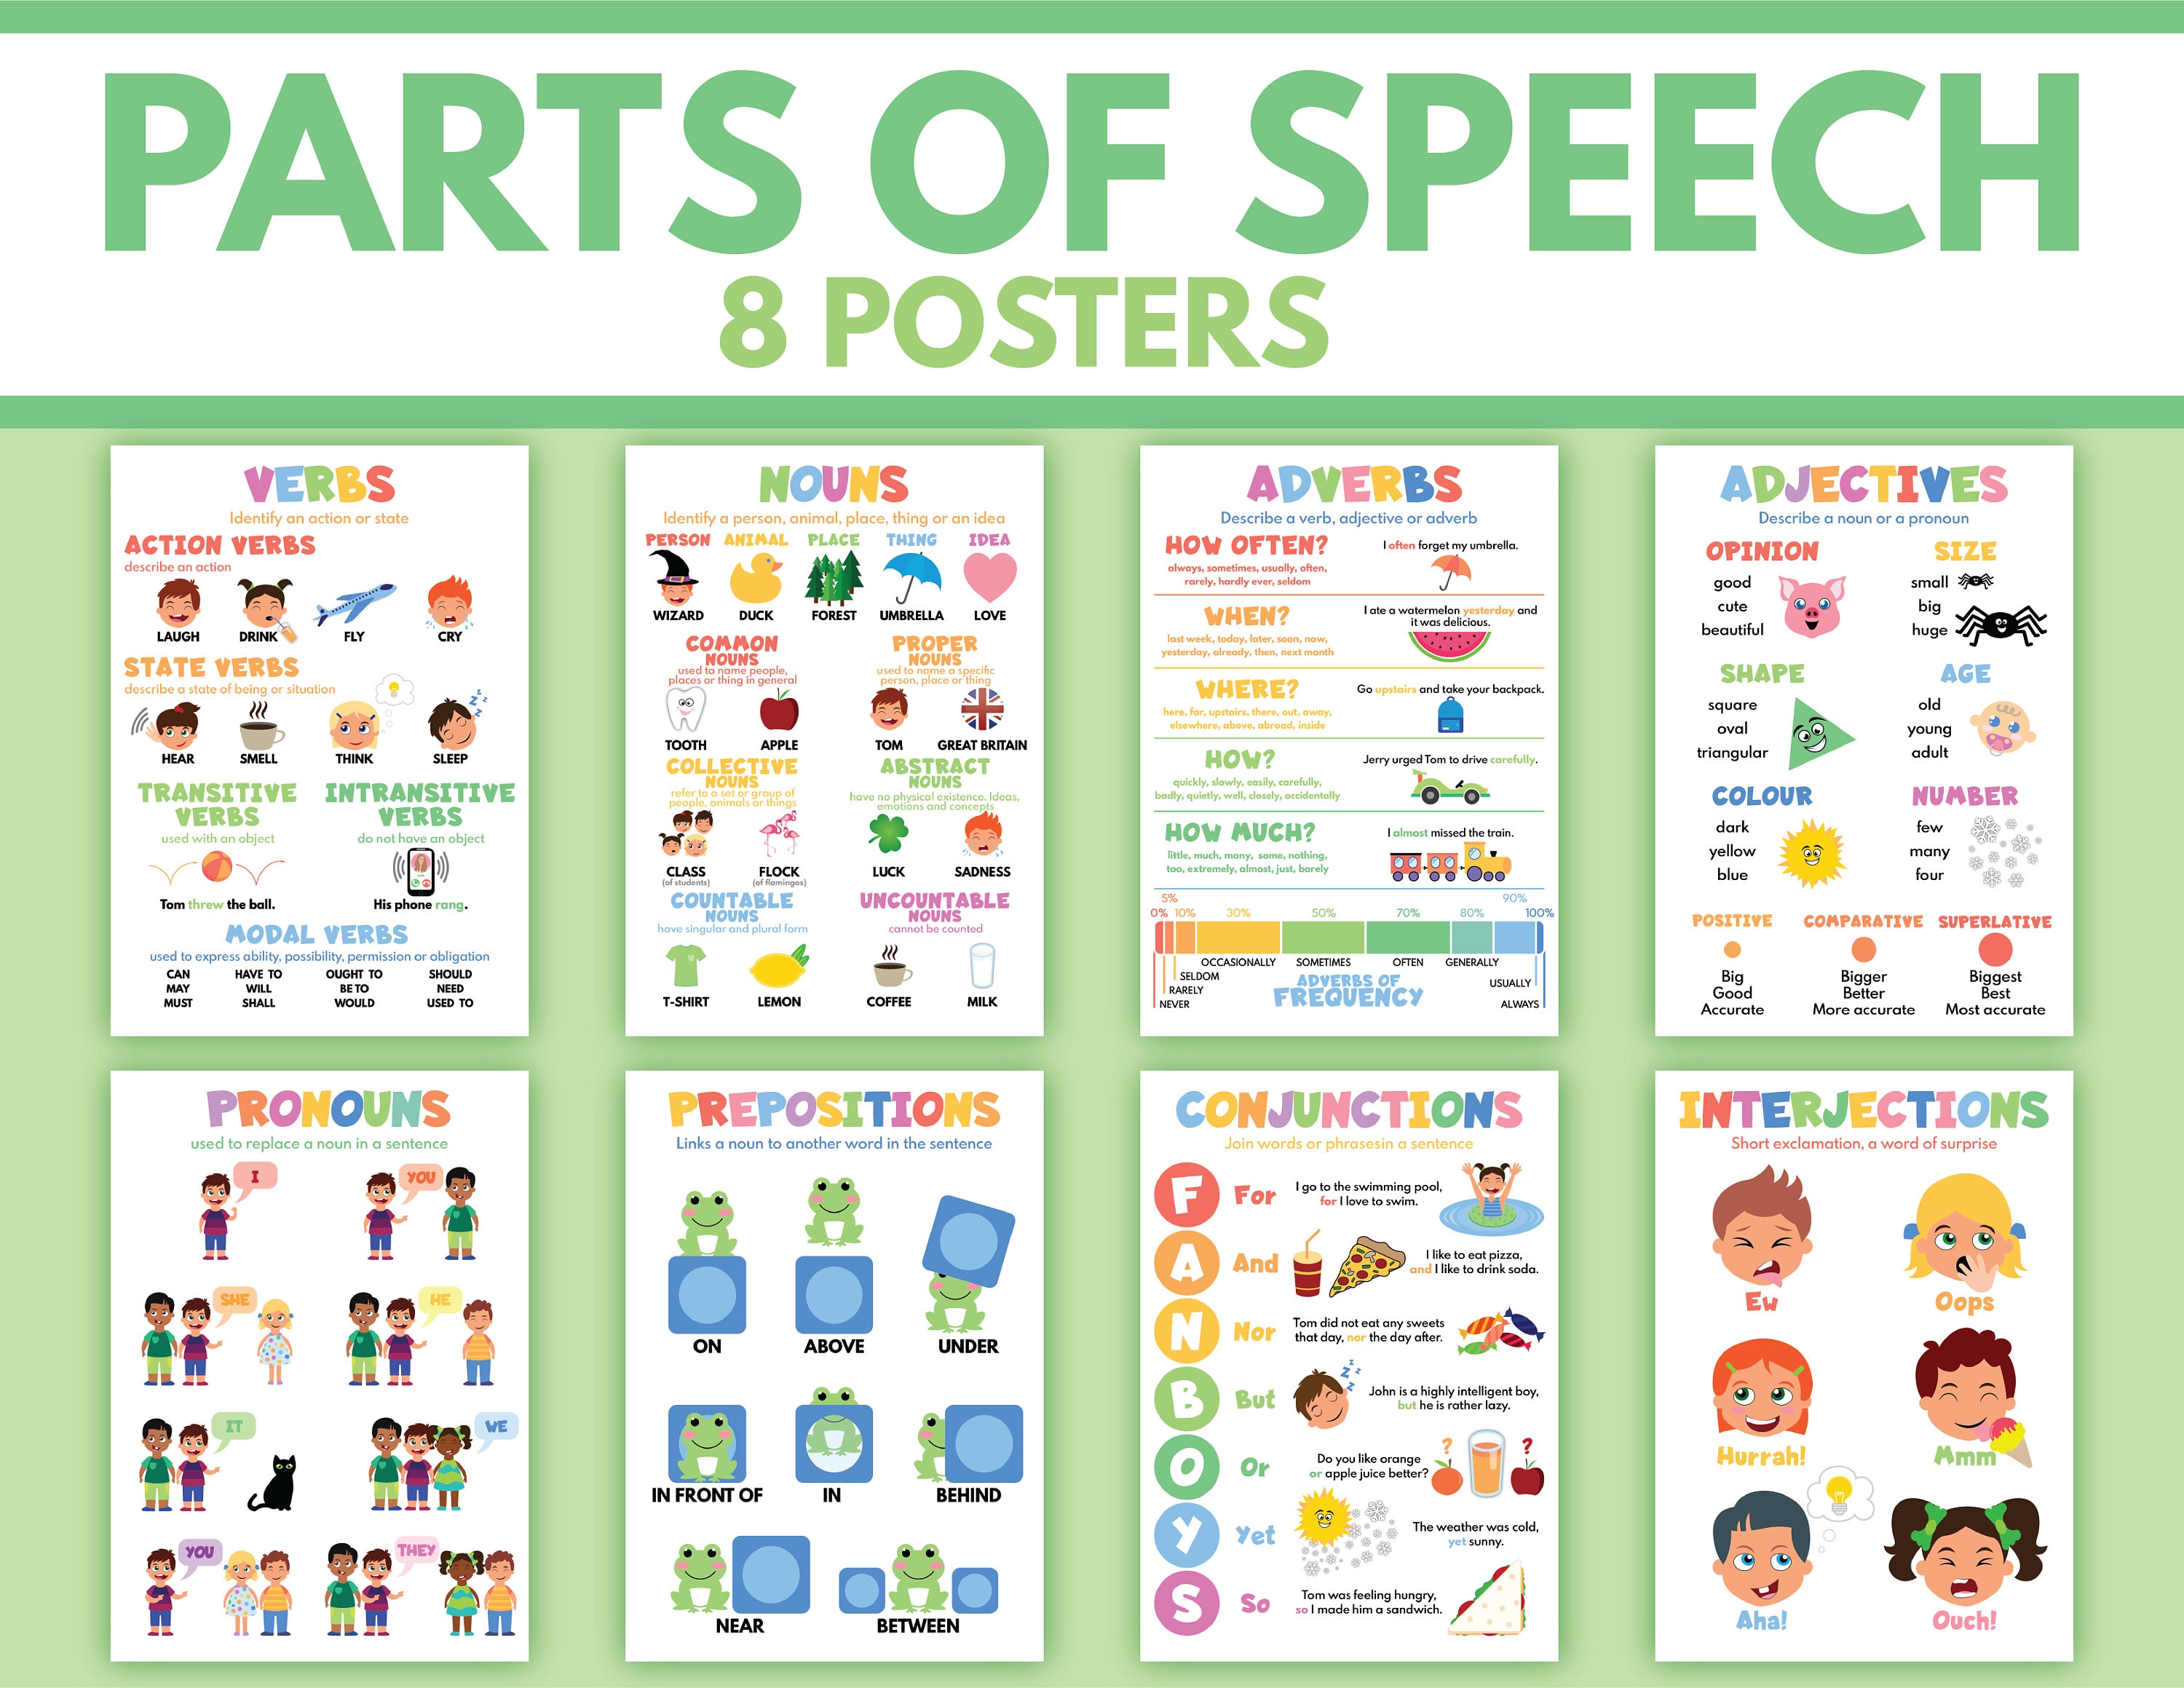 what are the 8 parts of speech